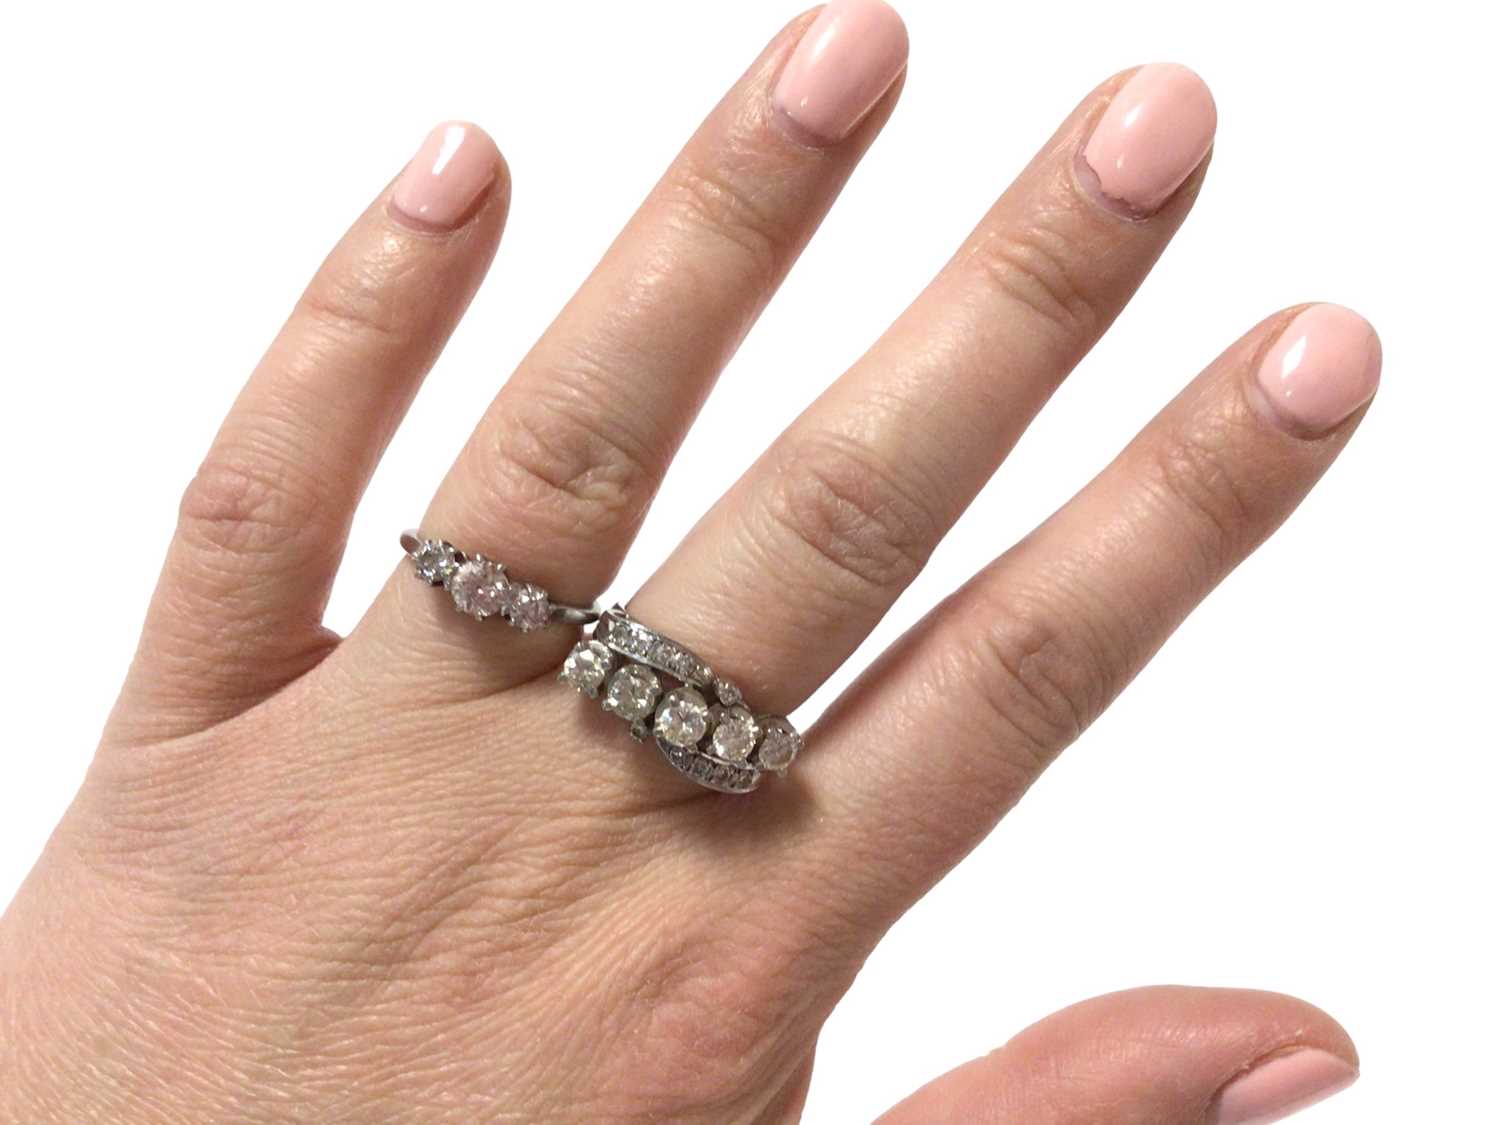 Diamond five stone ring in 18ct white gold setting and a diamond three stone ring in white gold sett - Image 2 of 2